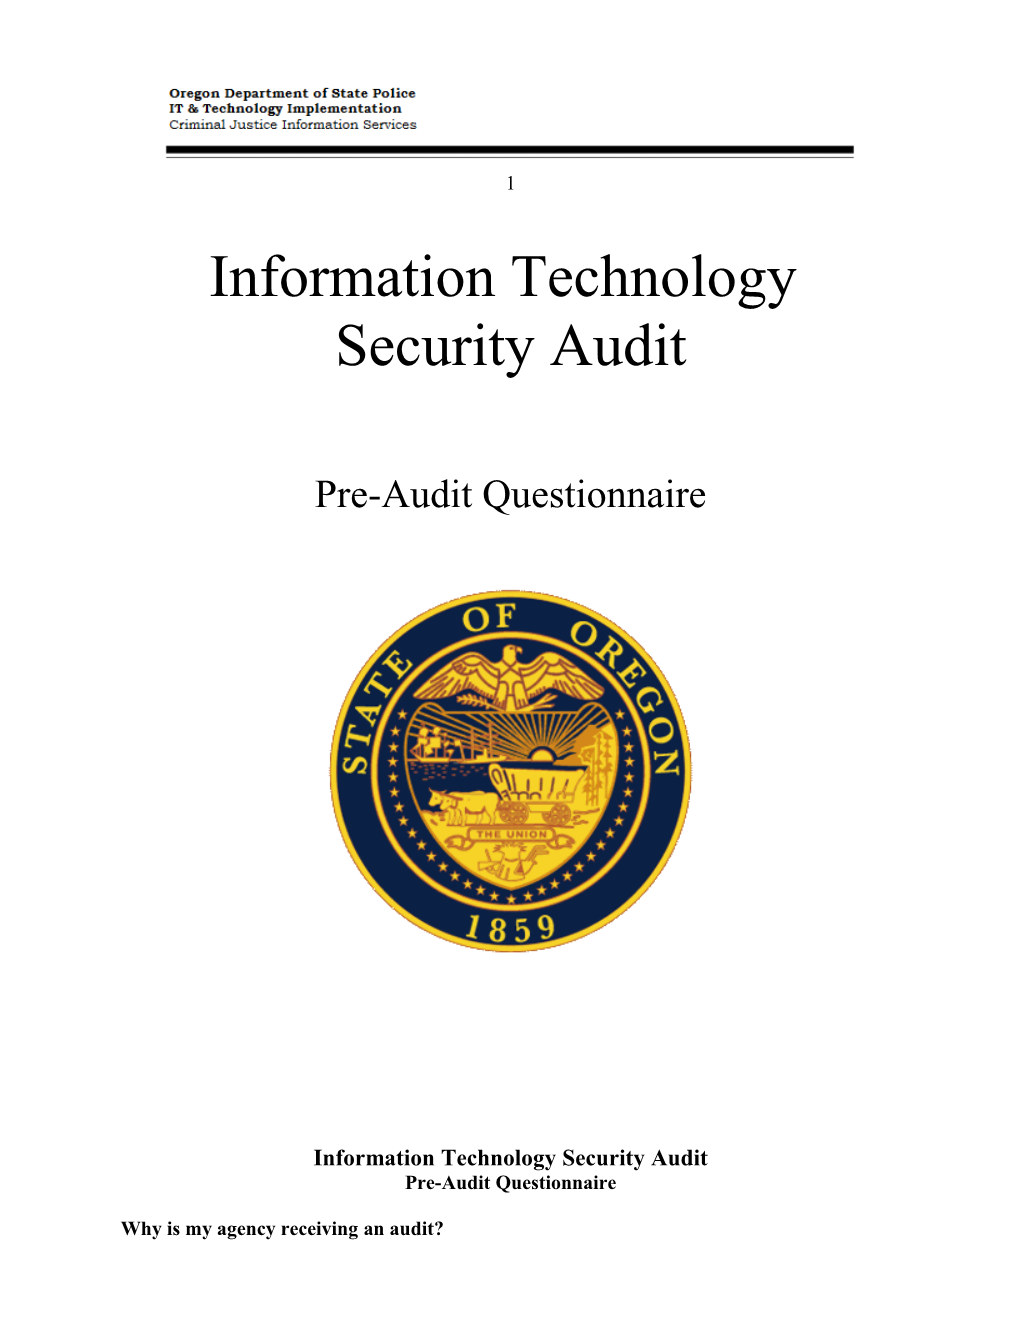 Information Technology Security Audit